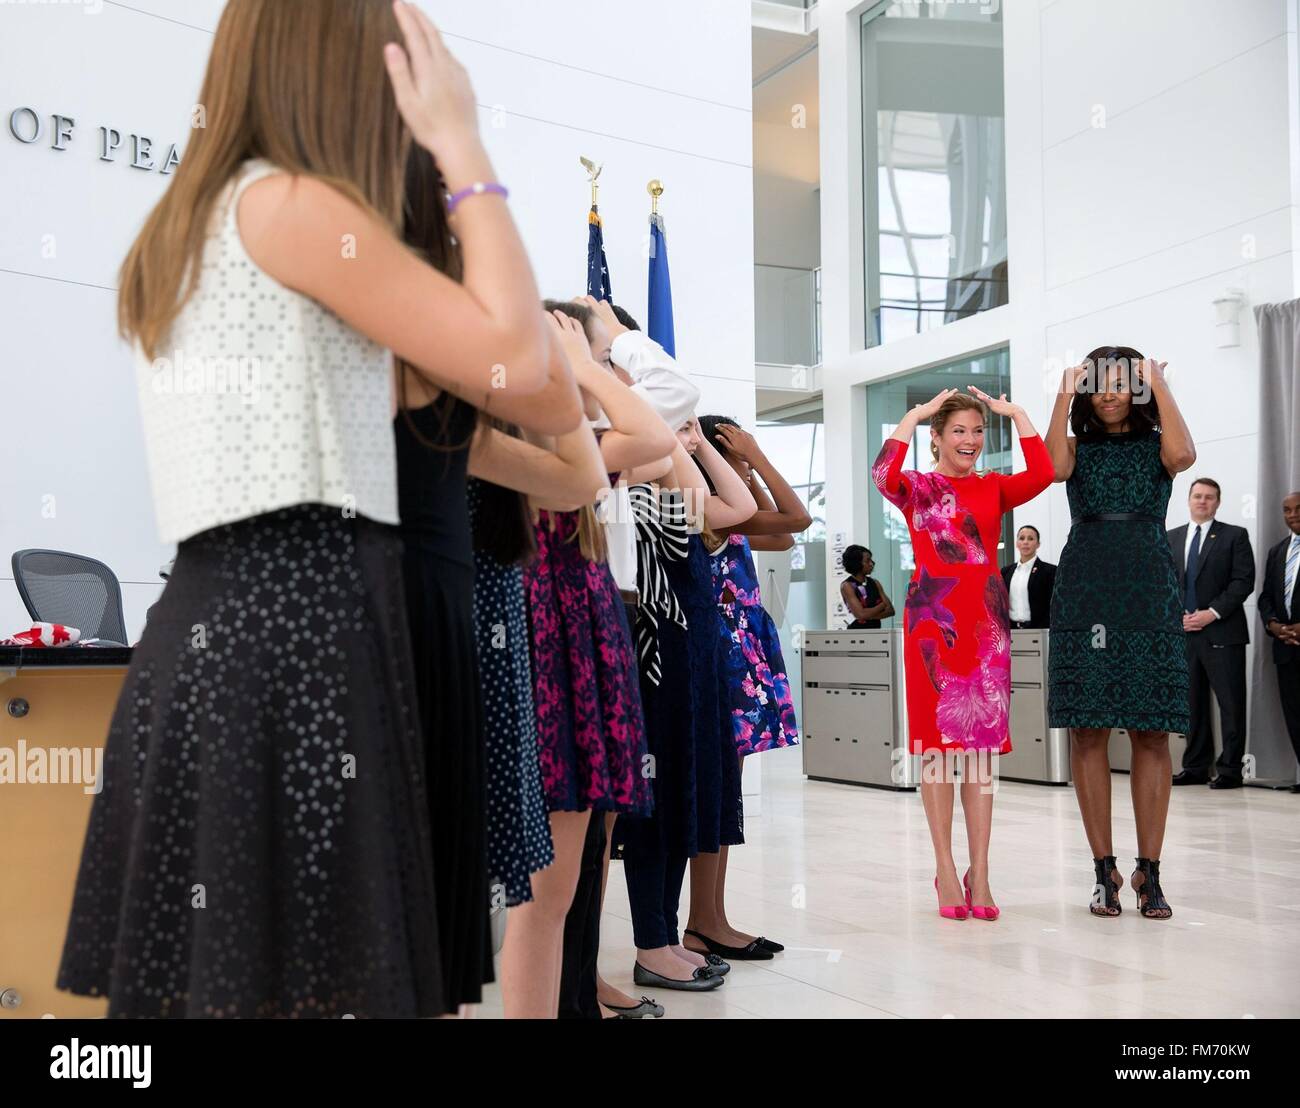 U.S. First Lady Michelle Obama and Canadian First Lady Sophie Gregoire Trudeau listen to students sing during a program at the United States Institute of Peace March 10, 2016 in Washington, DC. This is the first state visit by a Canadian Prime Minister in 20-years. Stock Photo